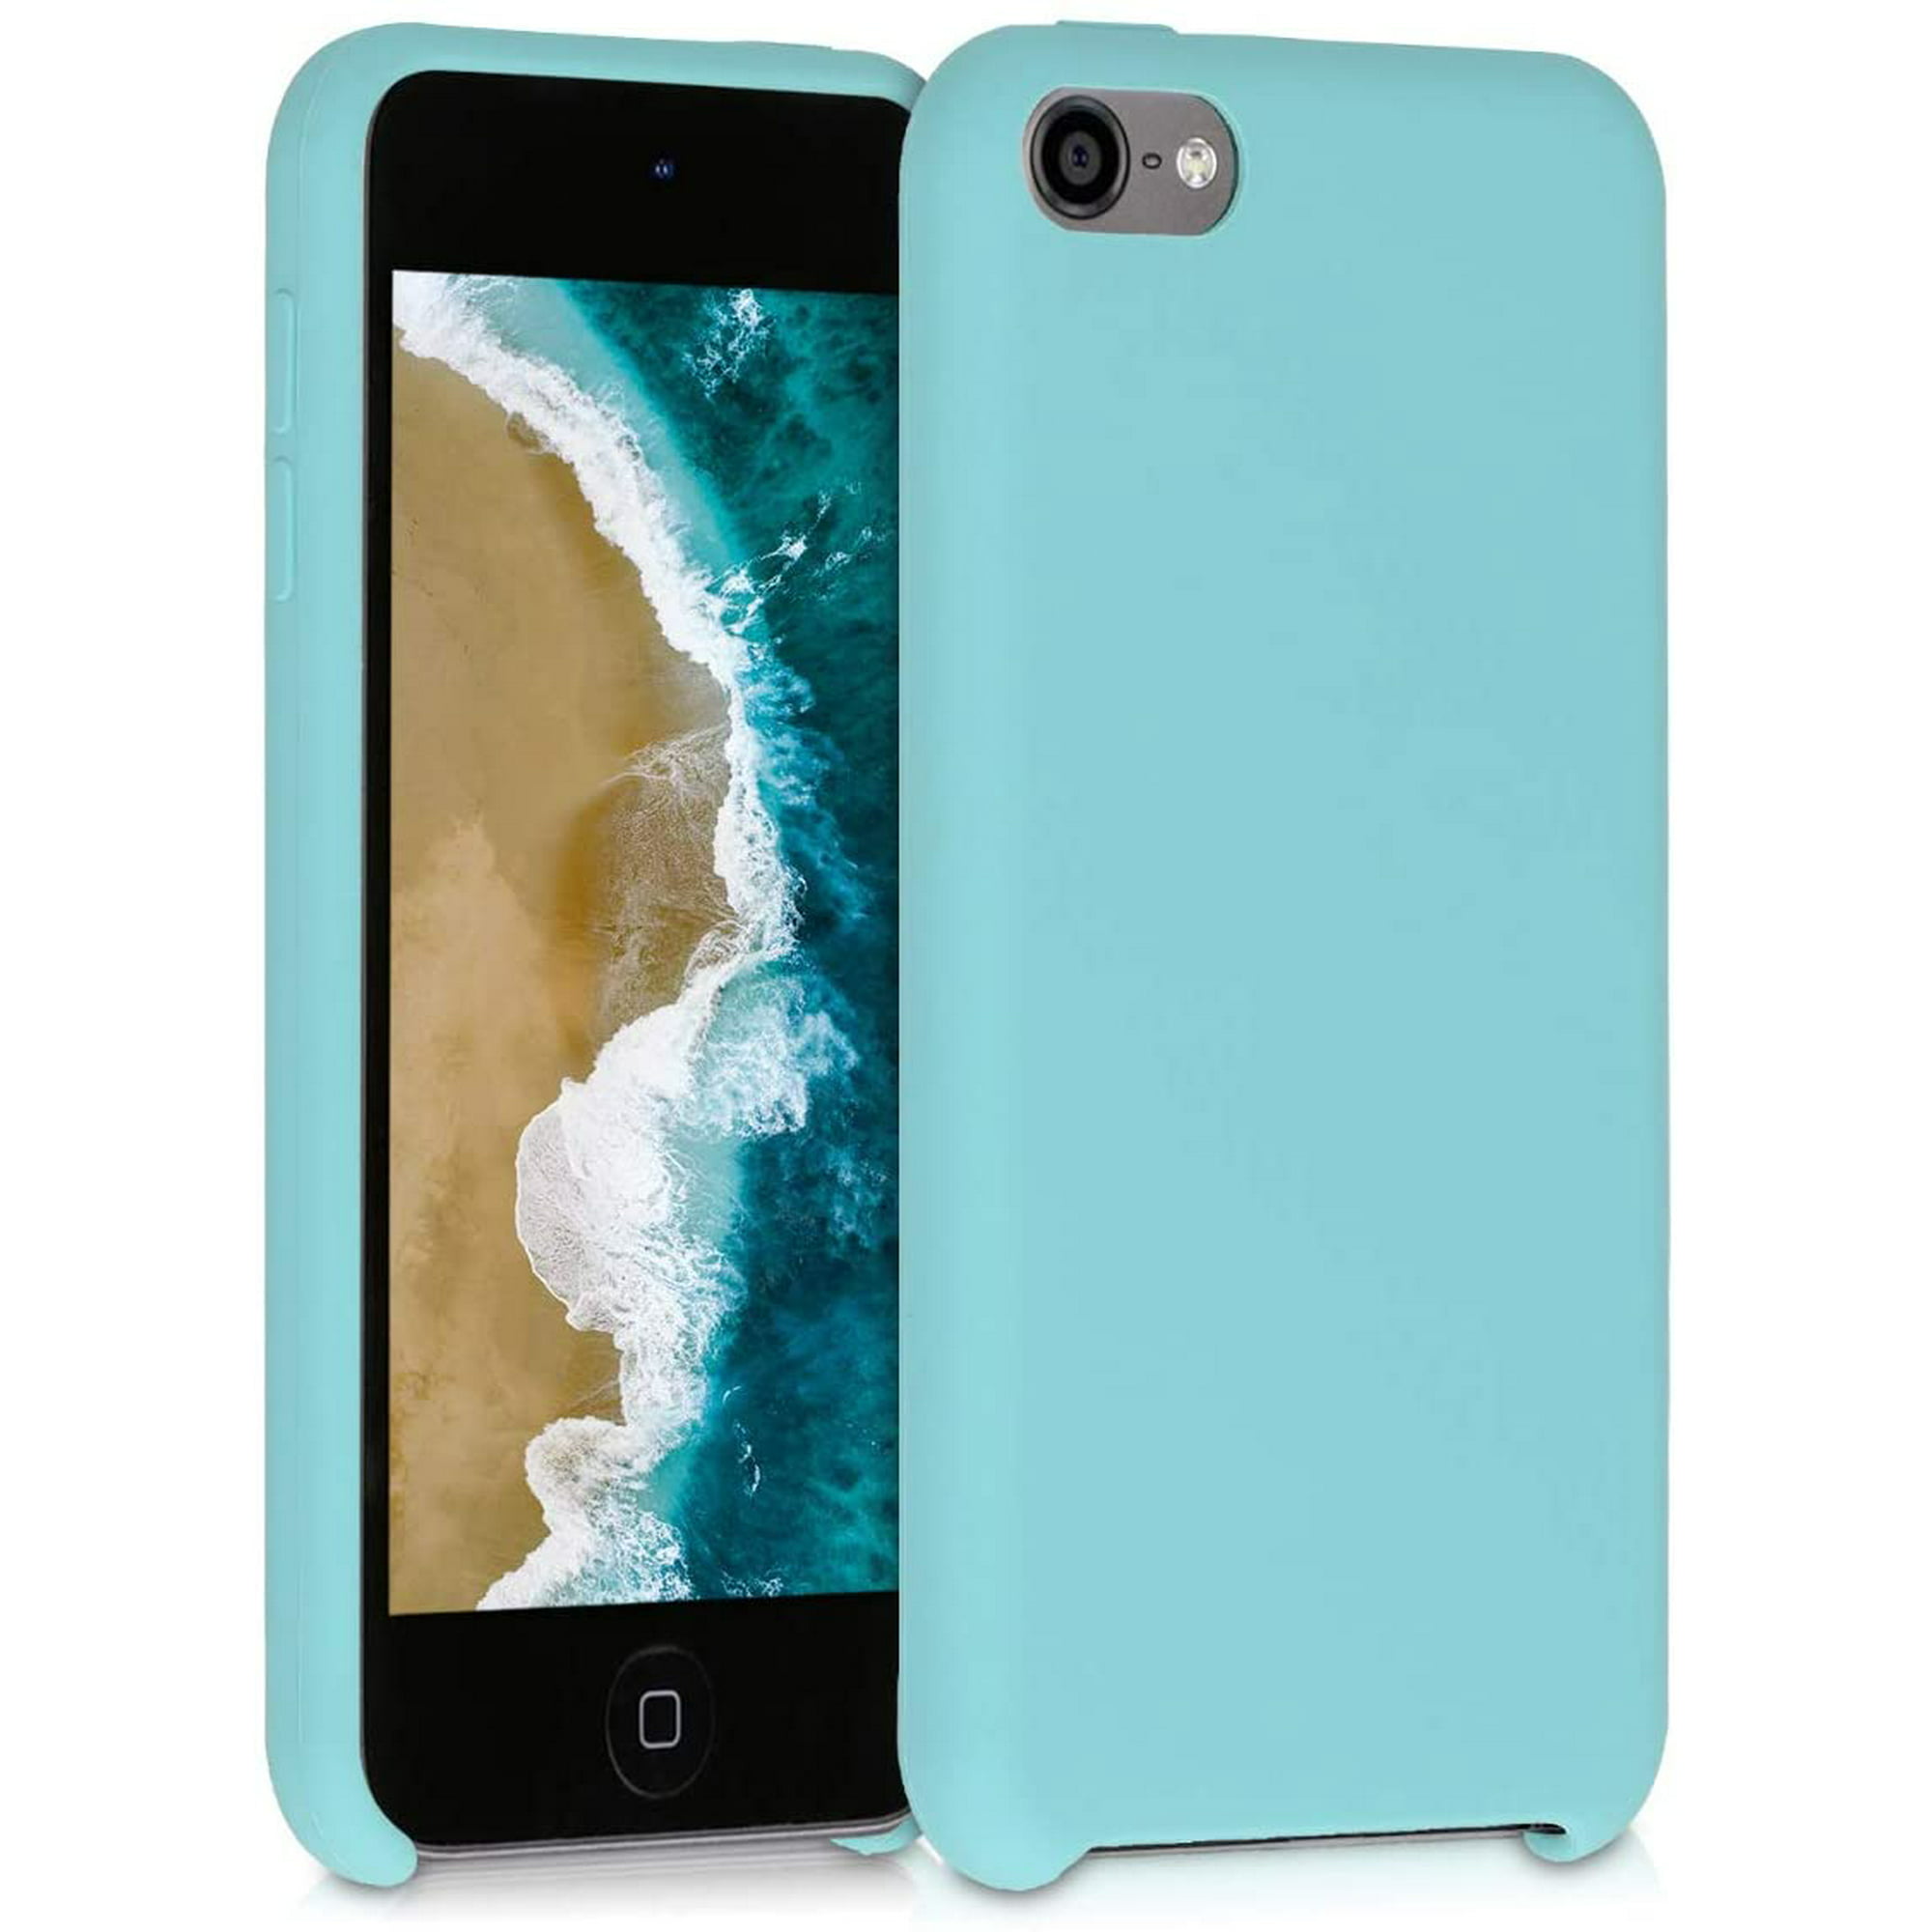 6th and 7th Generation kwmobile TPU Silicone Case Compatible with Apple iPod Touch 6G / 7G - Case Soft Flexible Protective Cover Buttercream 